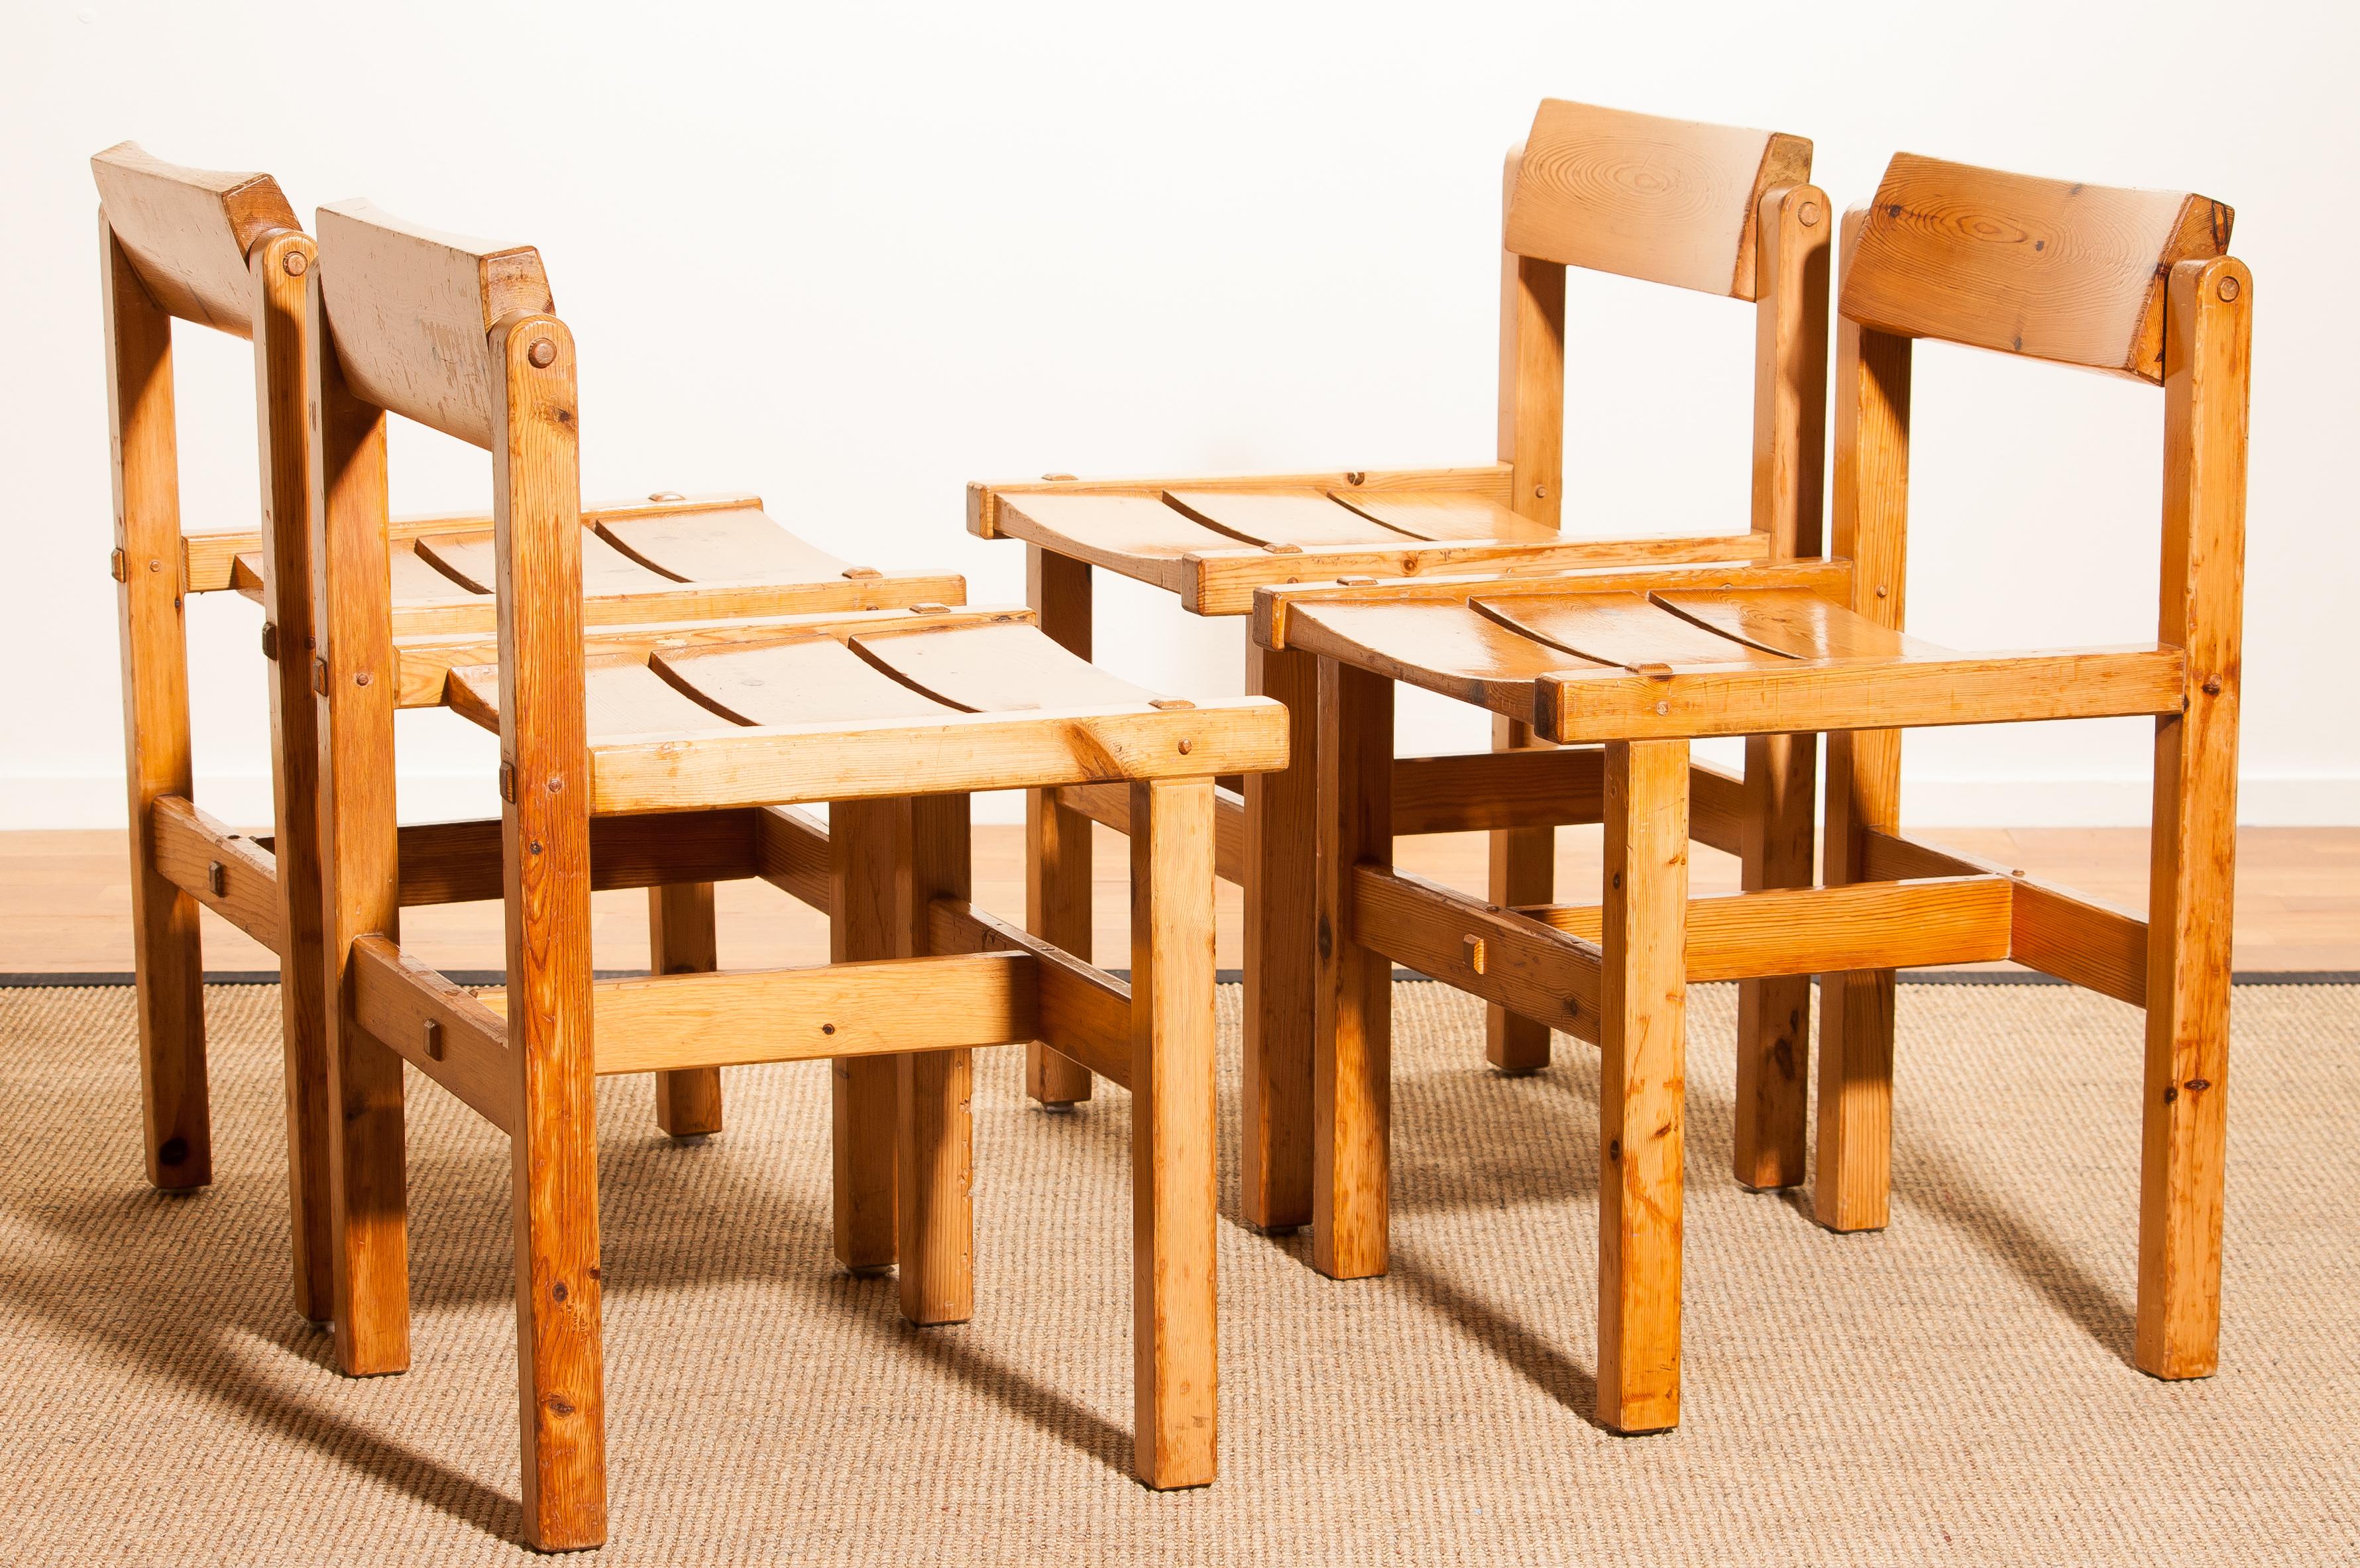 Mid-20th Century 1960s, Set of Four Pine Dining Chairs by Edvin Helseth, Norway